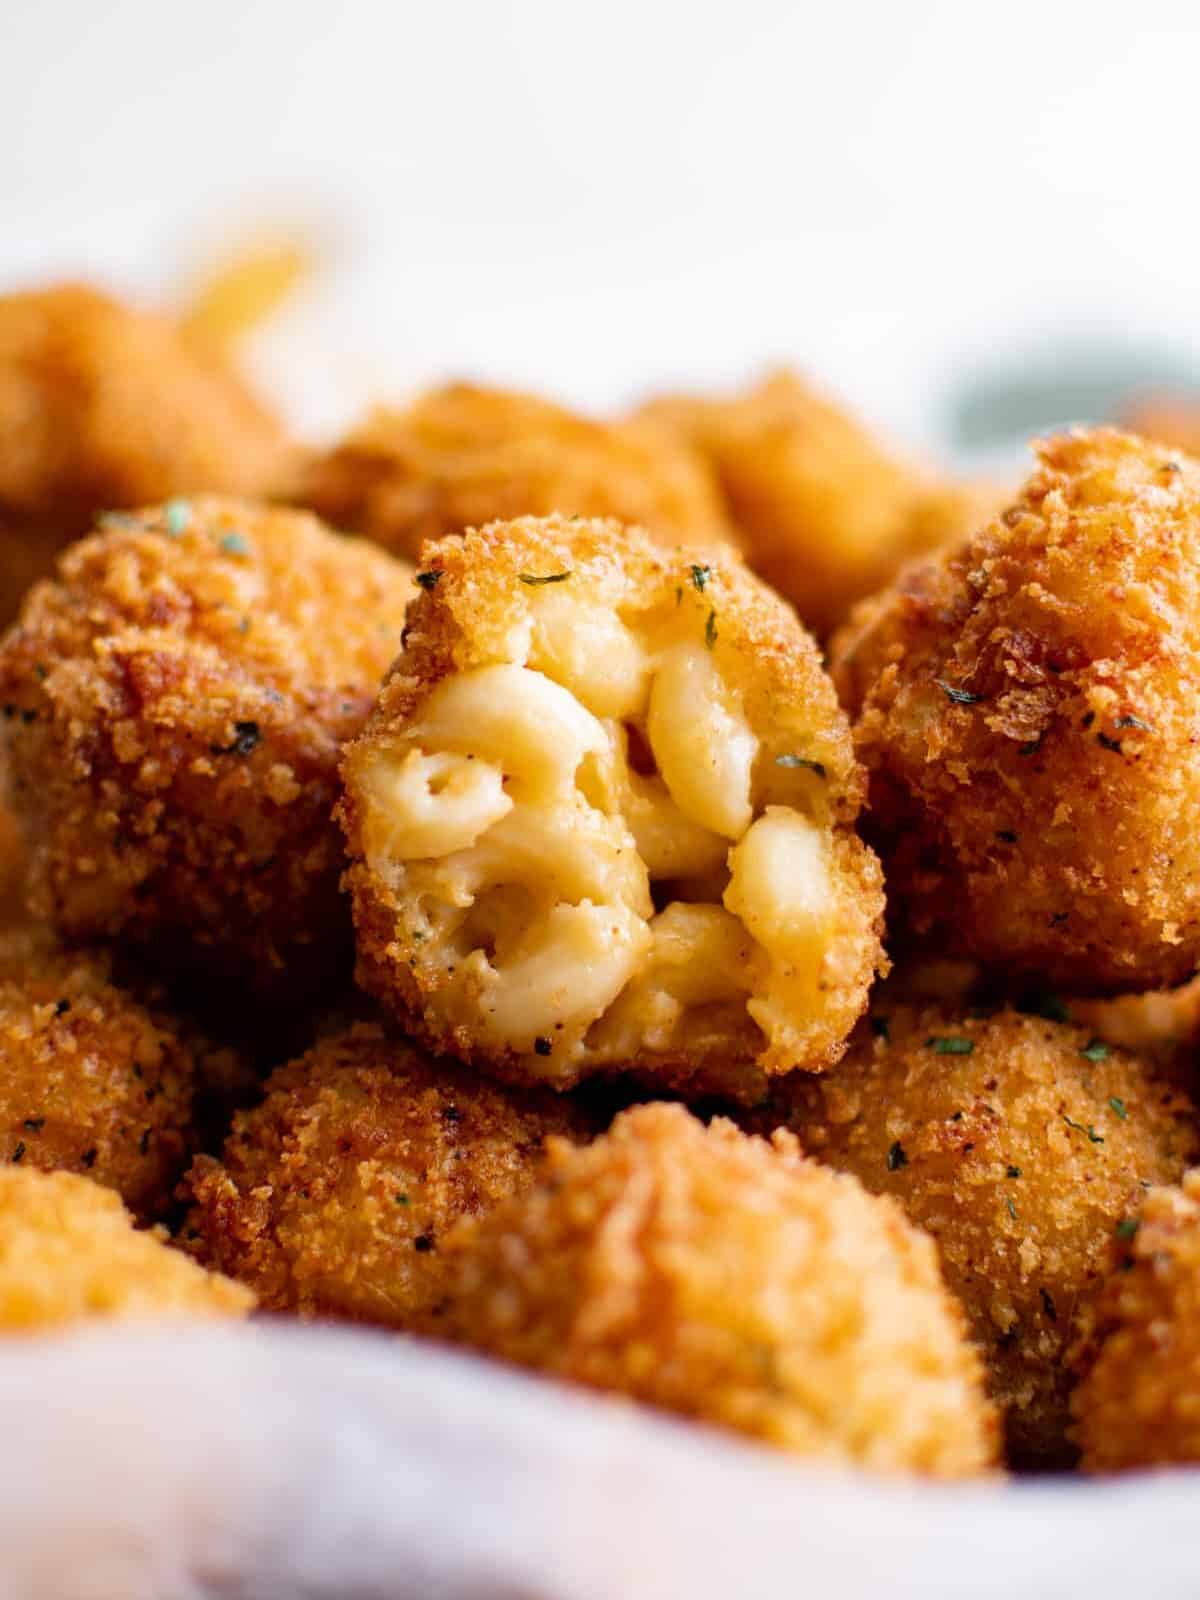 close up on a pile of fried mac and cheese balls; one has a bite taken out of it to reveal the macaroni inside.